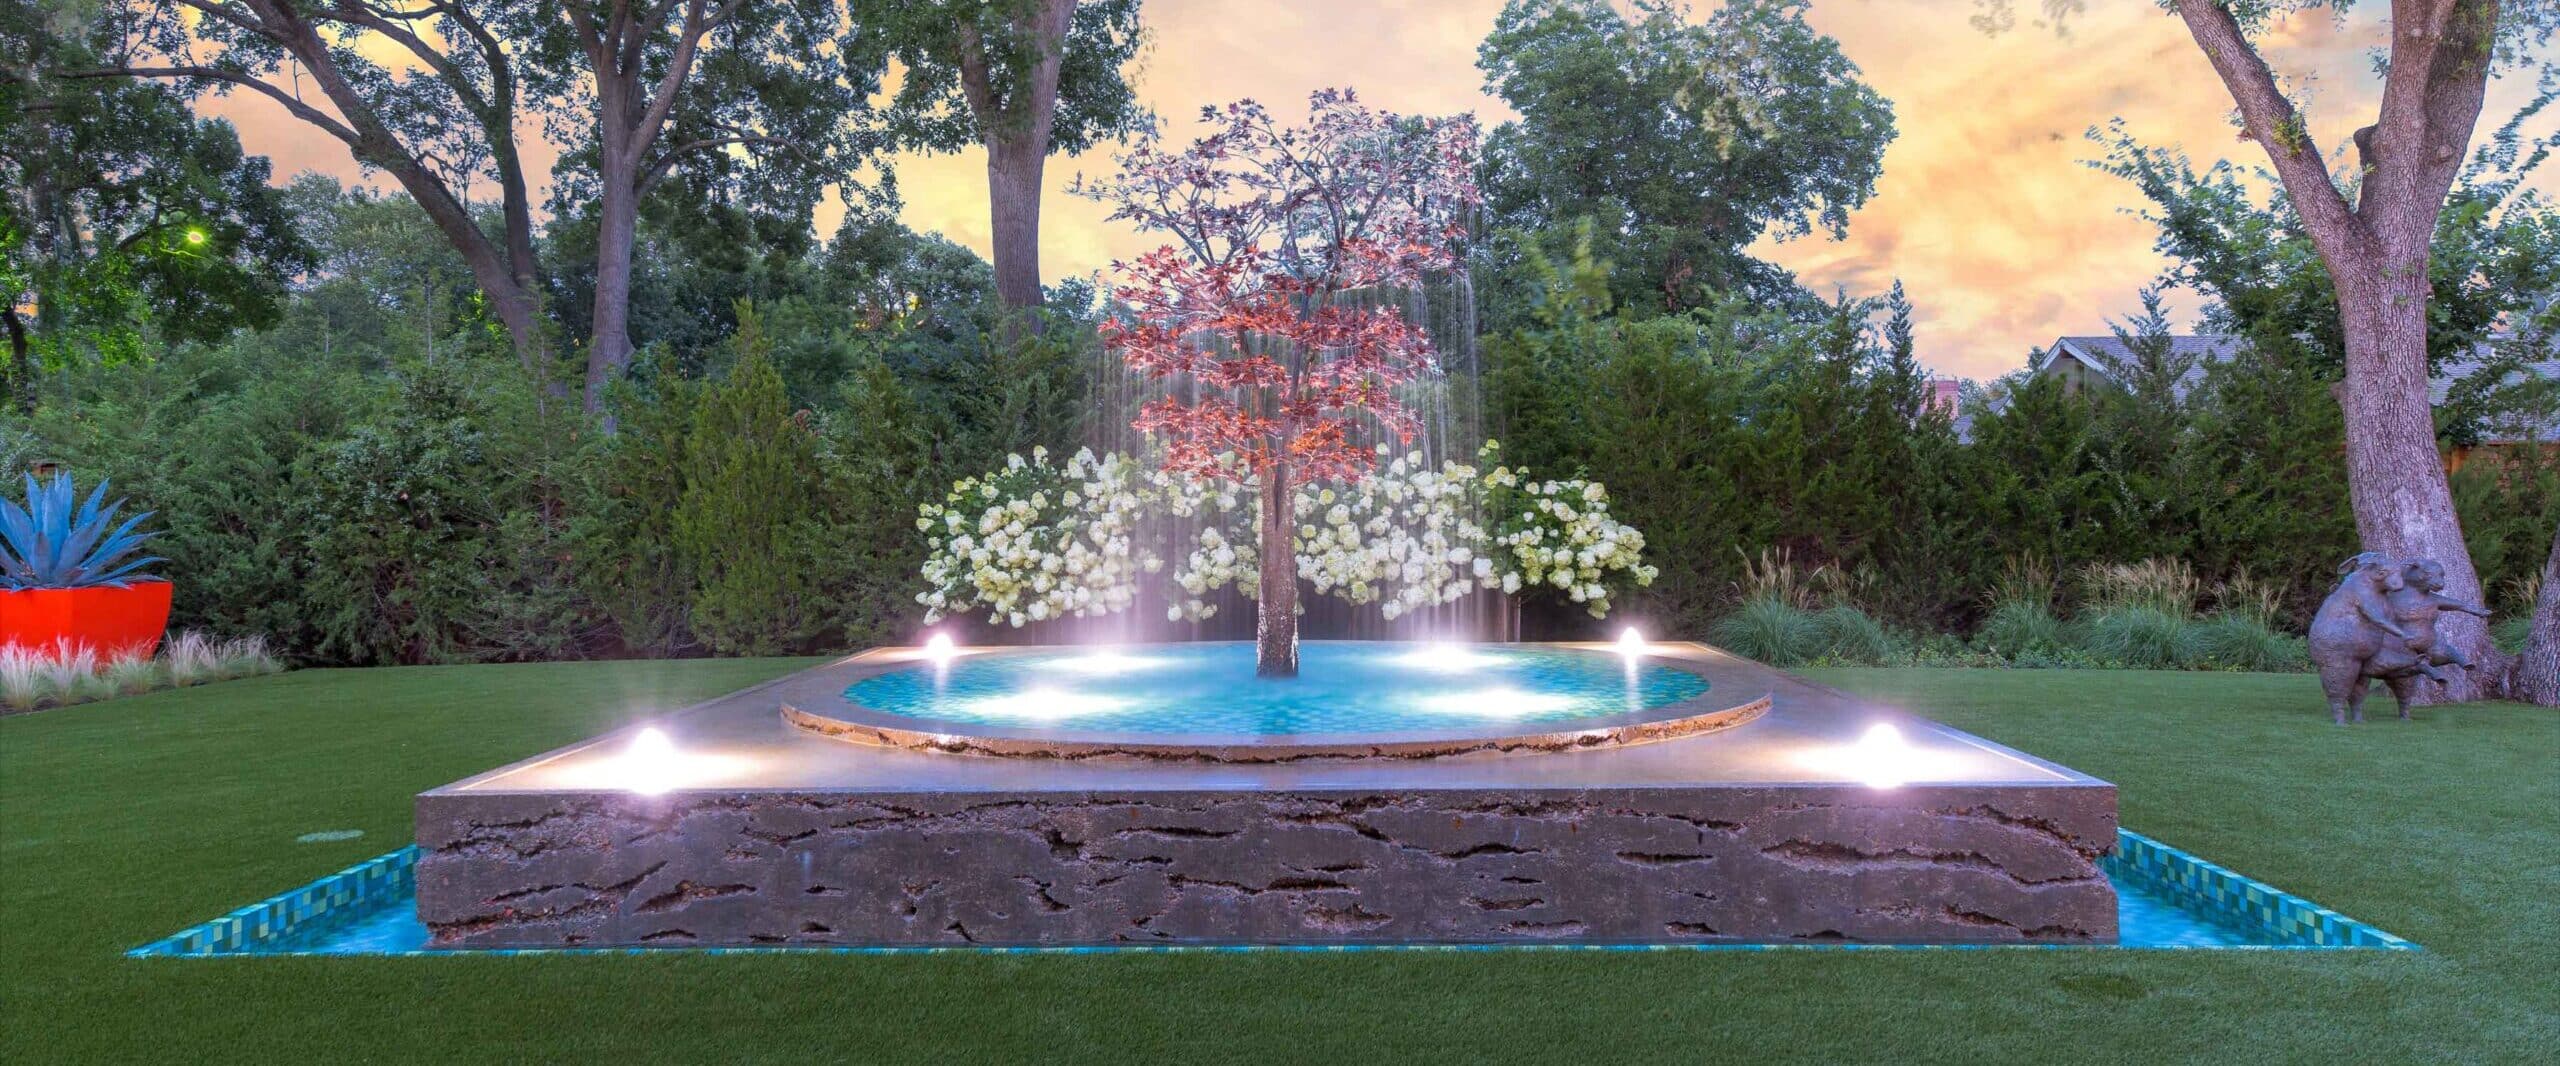 Lively Water Feature Design - Harold Leidner Landscape Architects